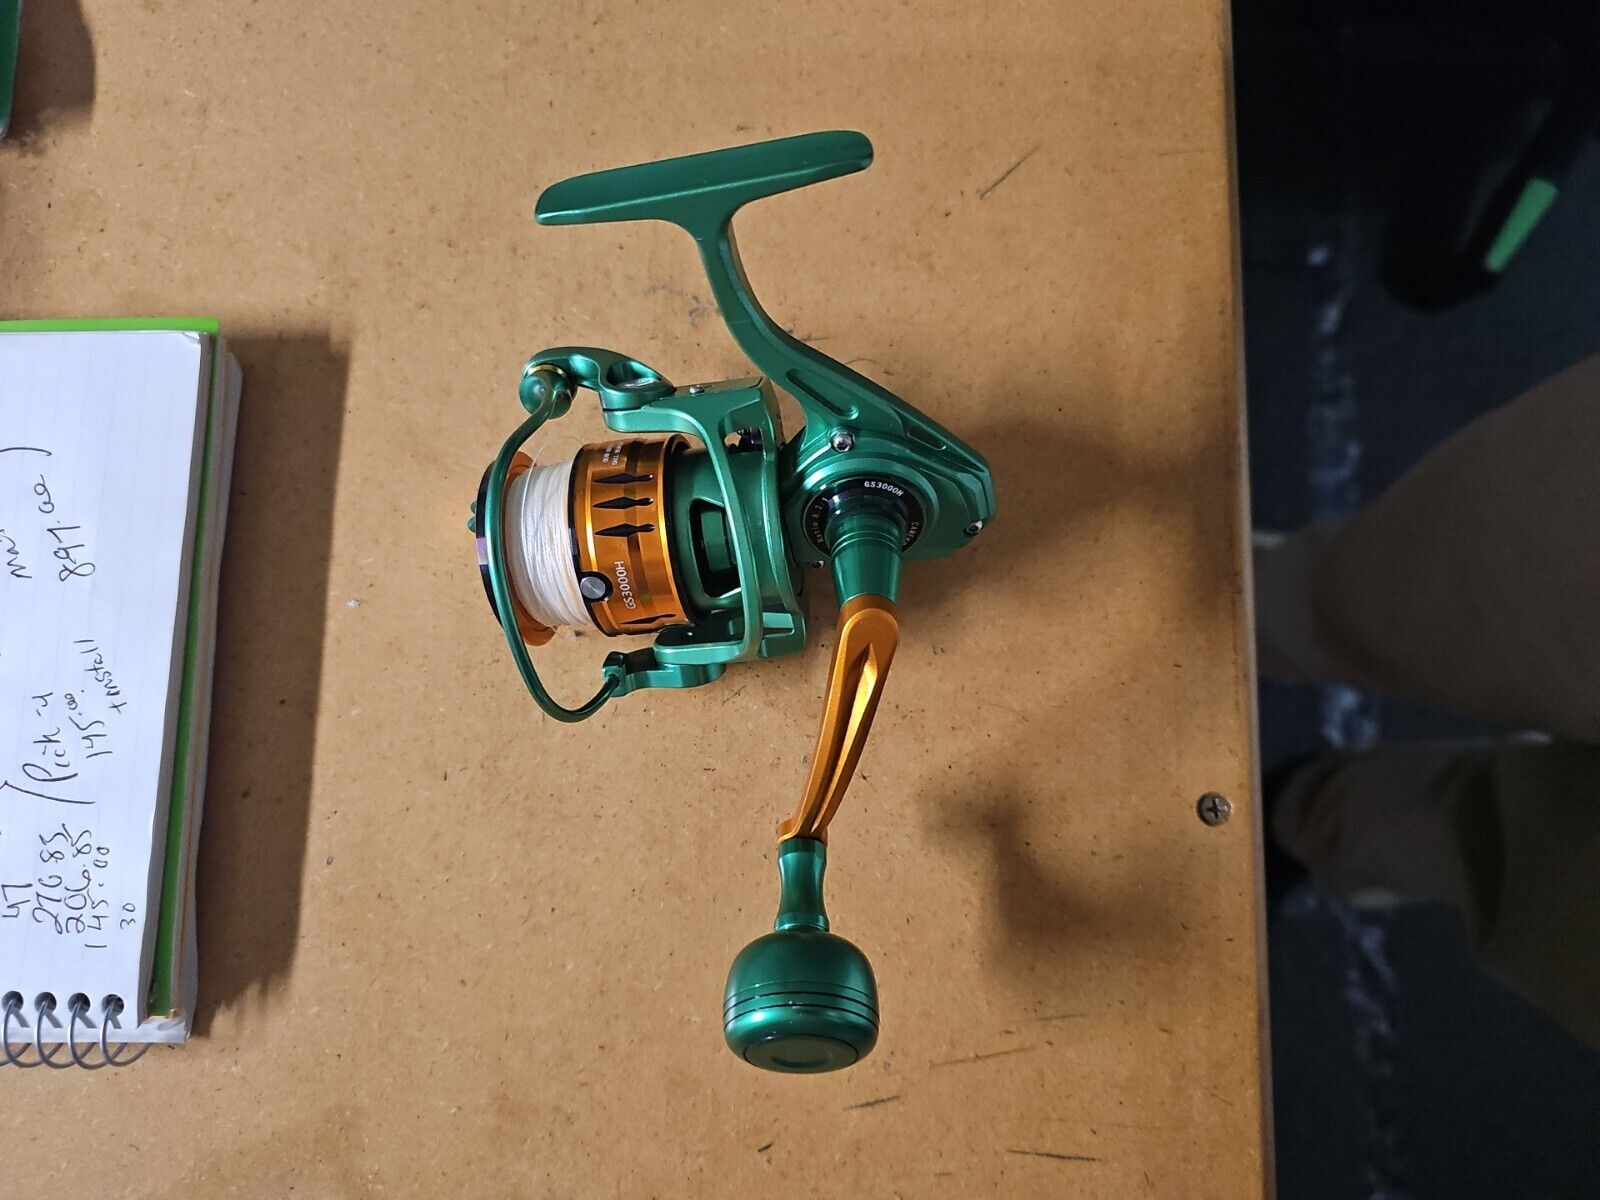 CAMEKOON Long Cast Spinning Pflueger Spinning Reels Metal Body, Ideal For  Saltwater And Surf Fishing, Big Sea Trolling 8000/900/010000/11000 Thread  Size From Dao05, $66.33